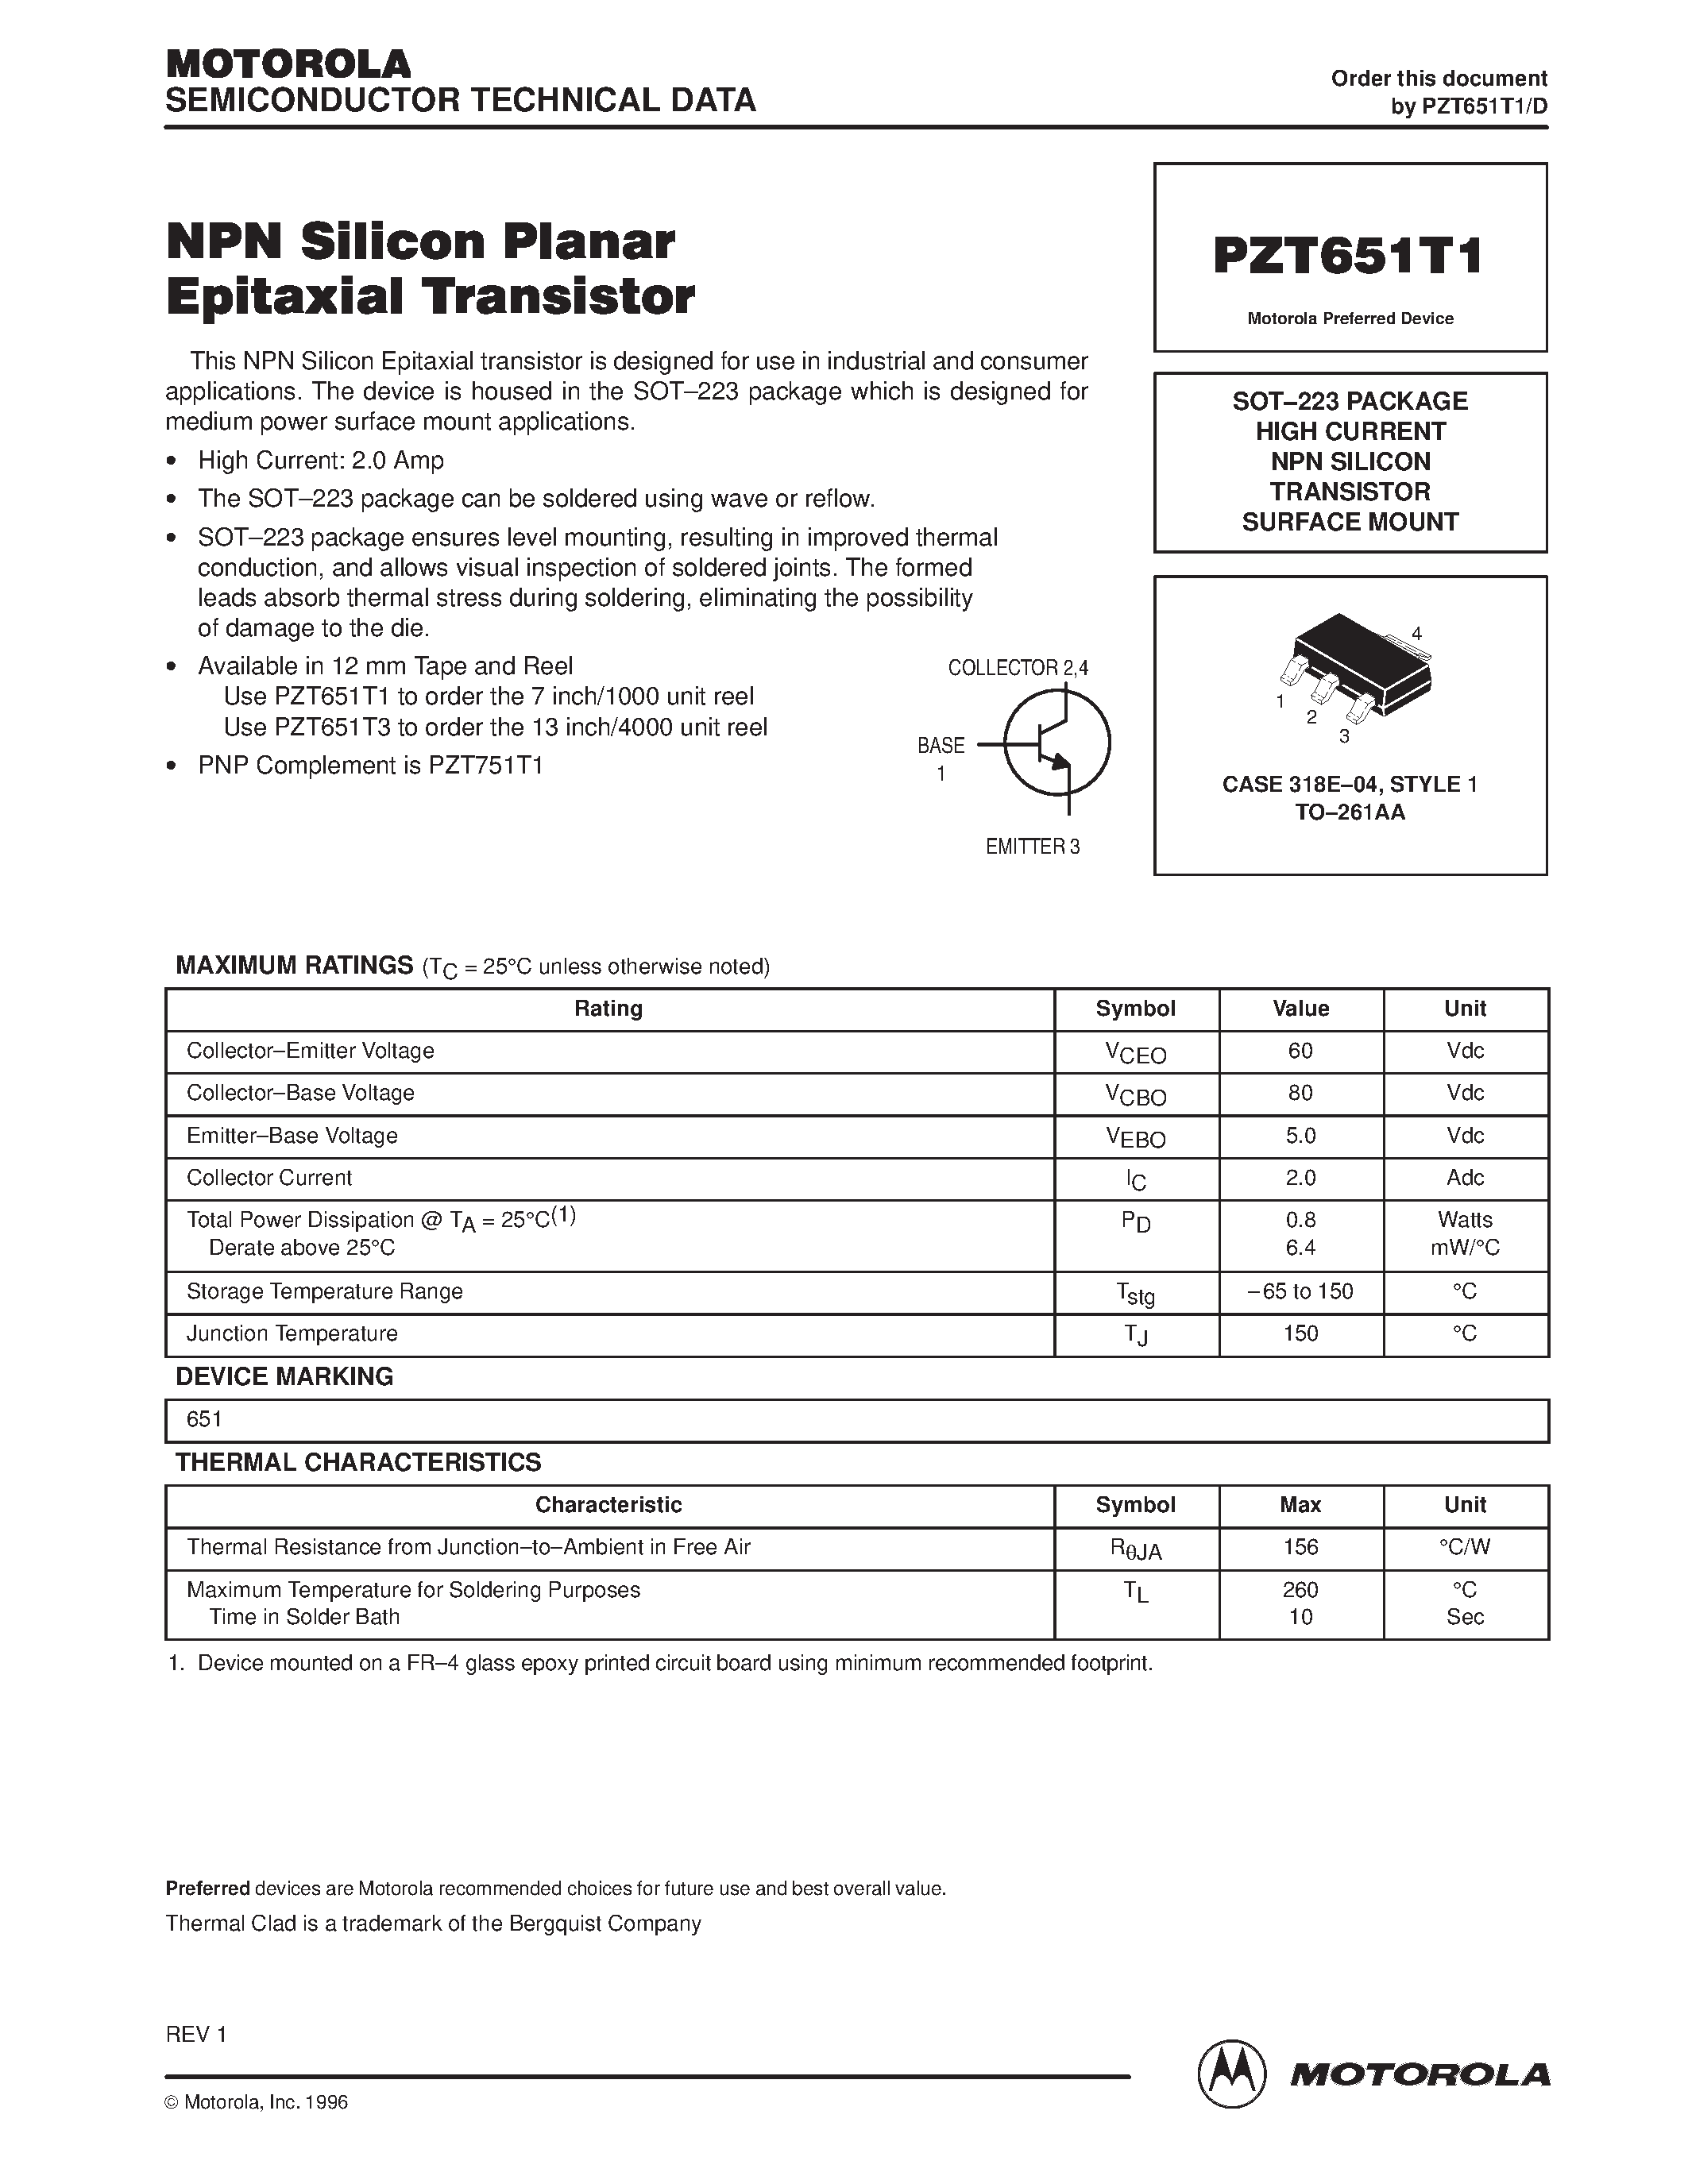 Datasheet PZT65 - HIGH CURRENT NPN SILICON TRANSISTOR SURFACE MOUNT page 1